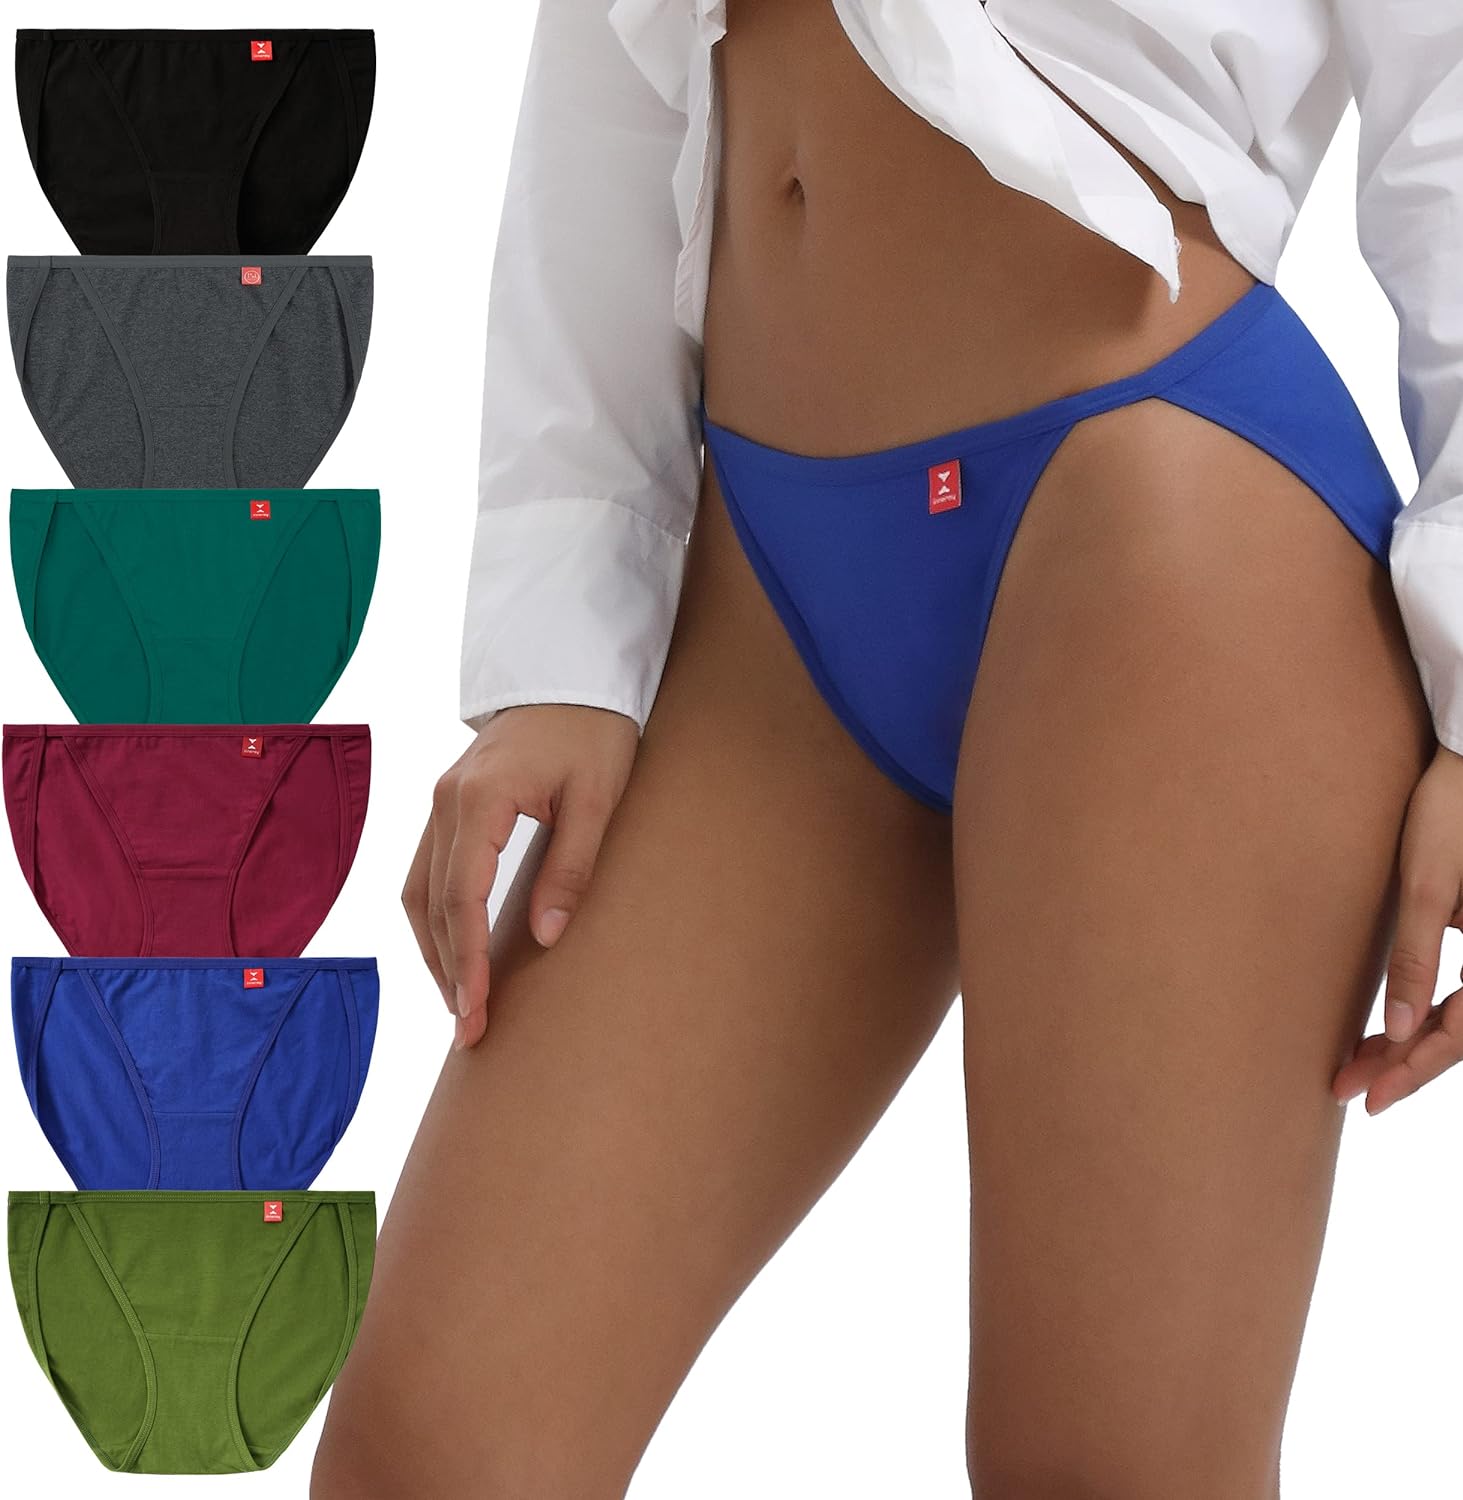 INNERSY Women's Thong Panty Cotton Sporty Thong Underwear 5-Pack